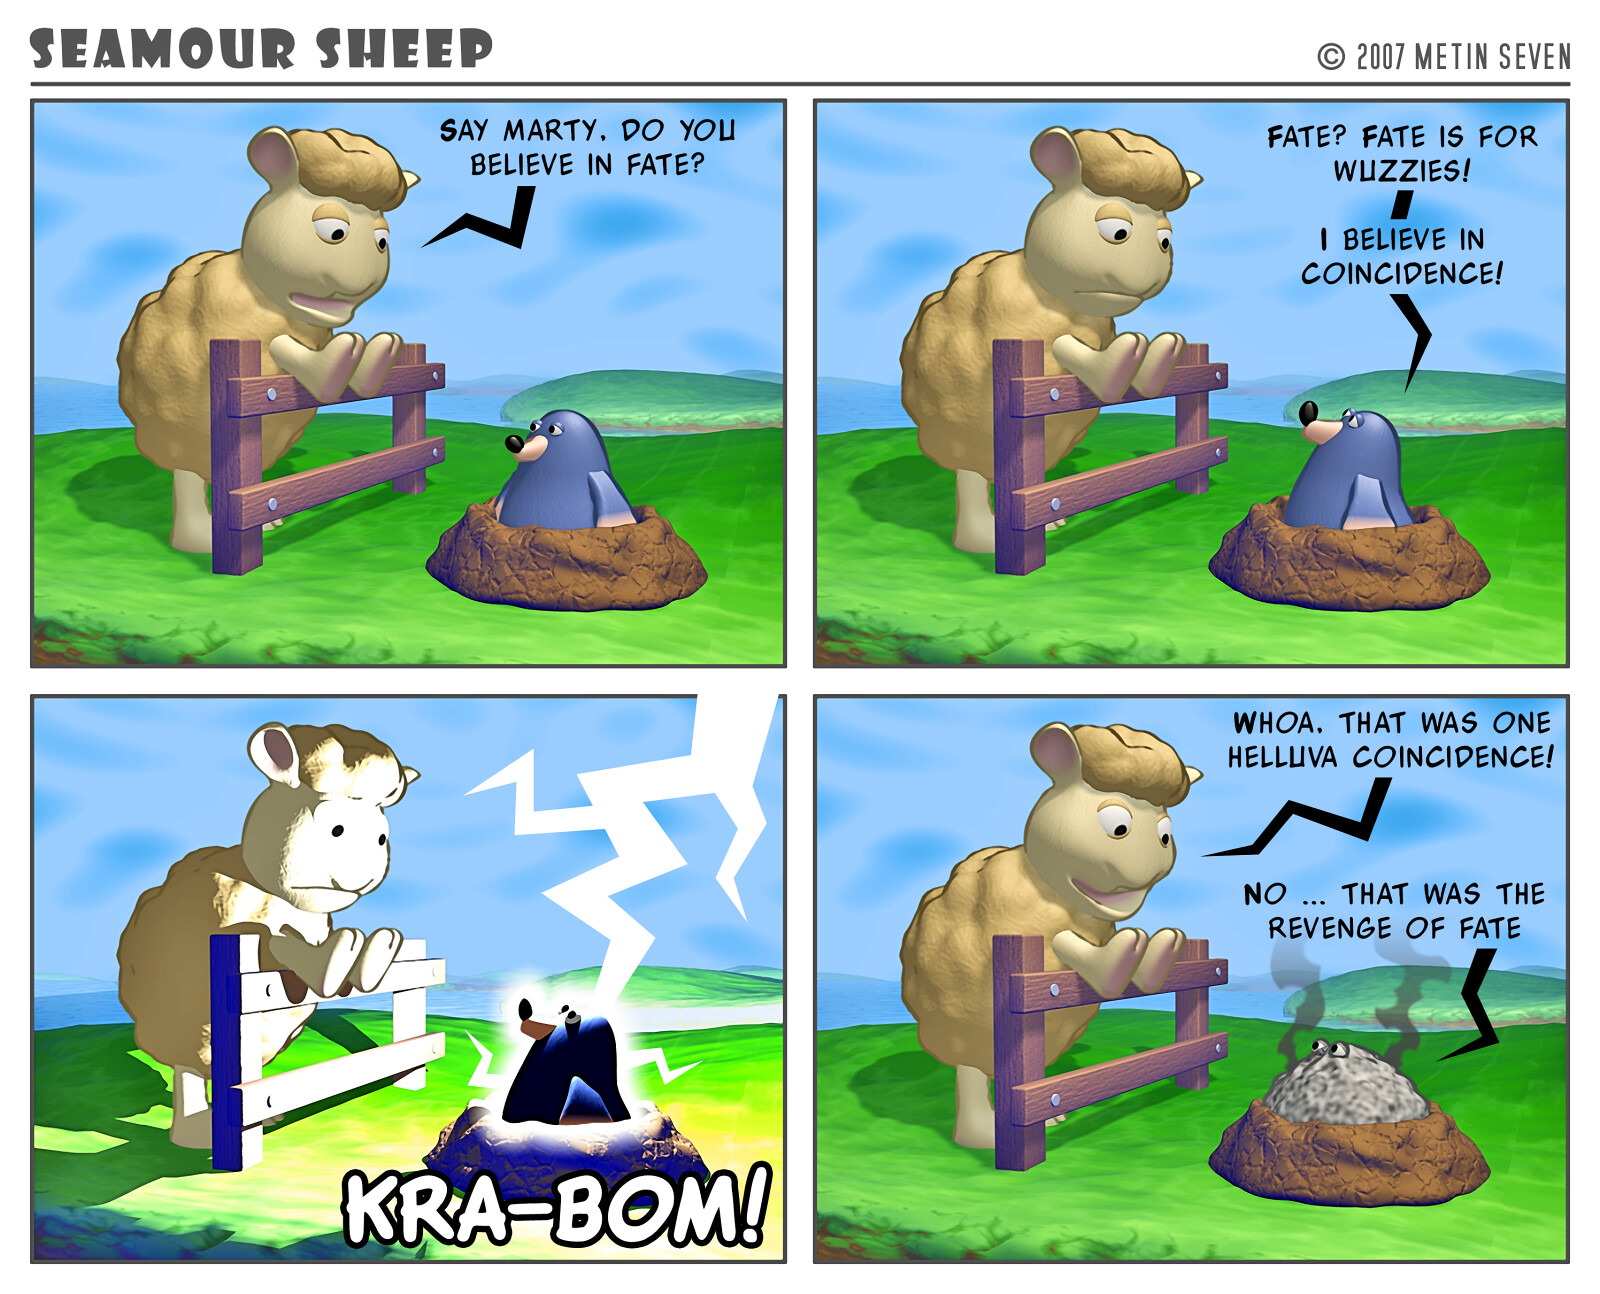 Seamour Sheep and Marty Mole comic strip episode: Fate